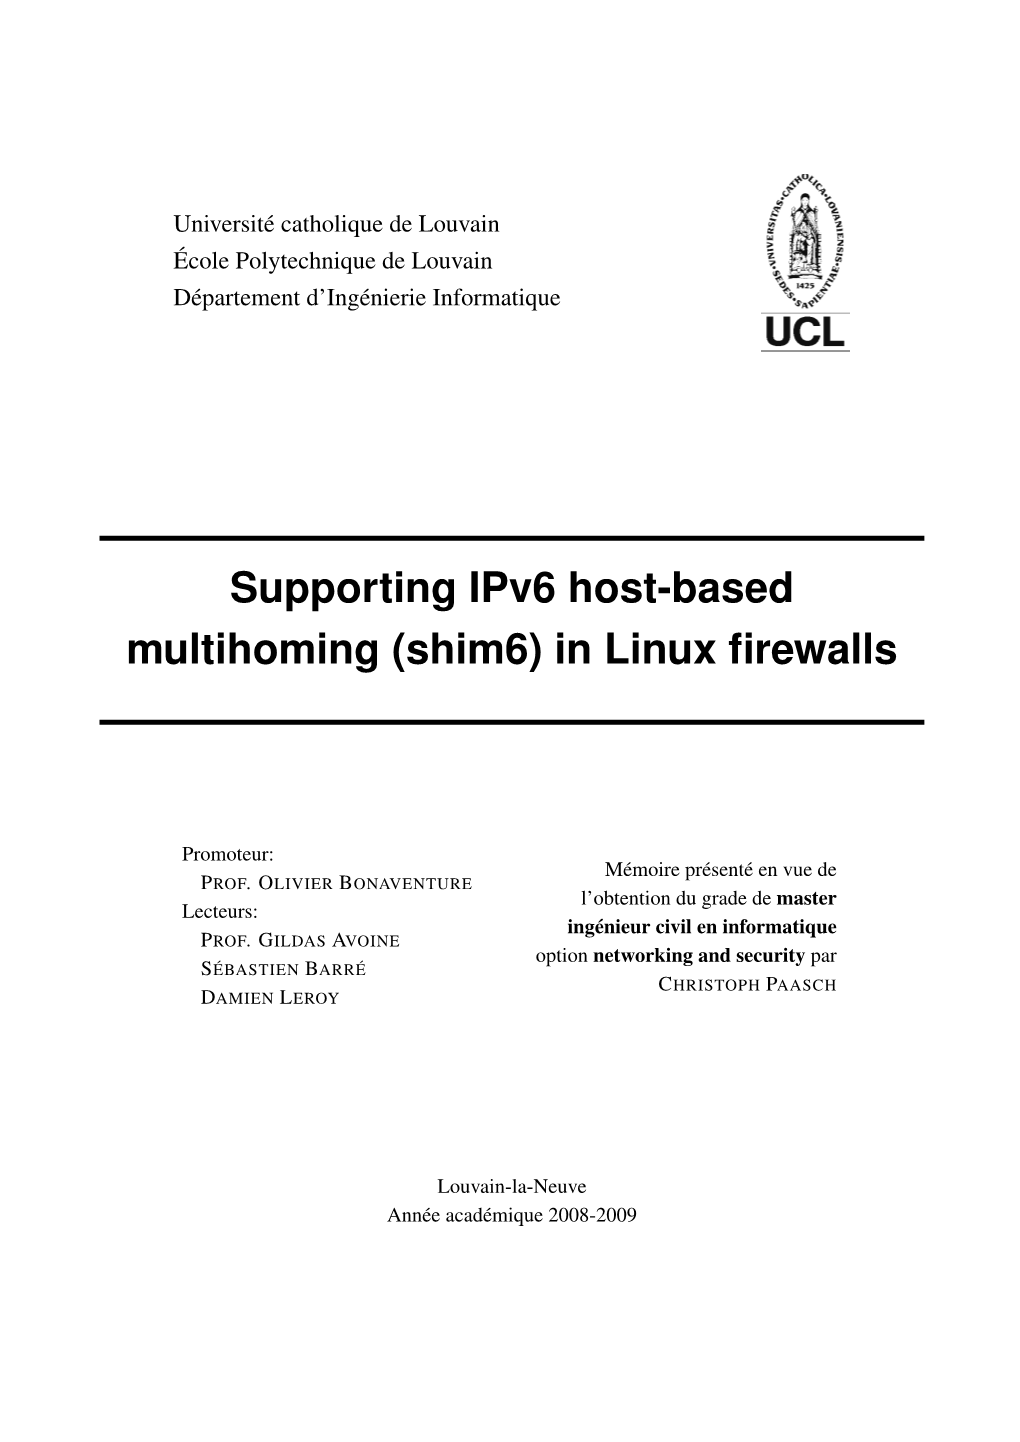 Supporting Ipv6 Host-Based Multihoming (Shim6) in Linux Firewalls